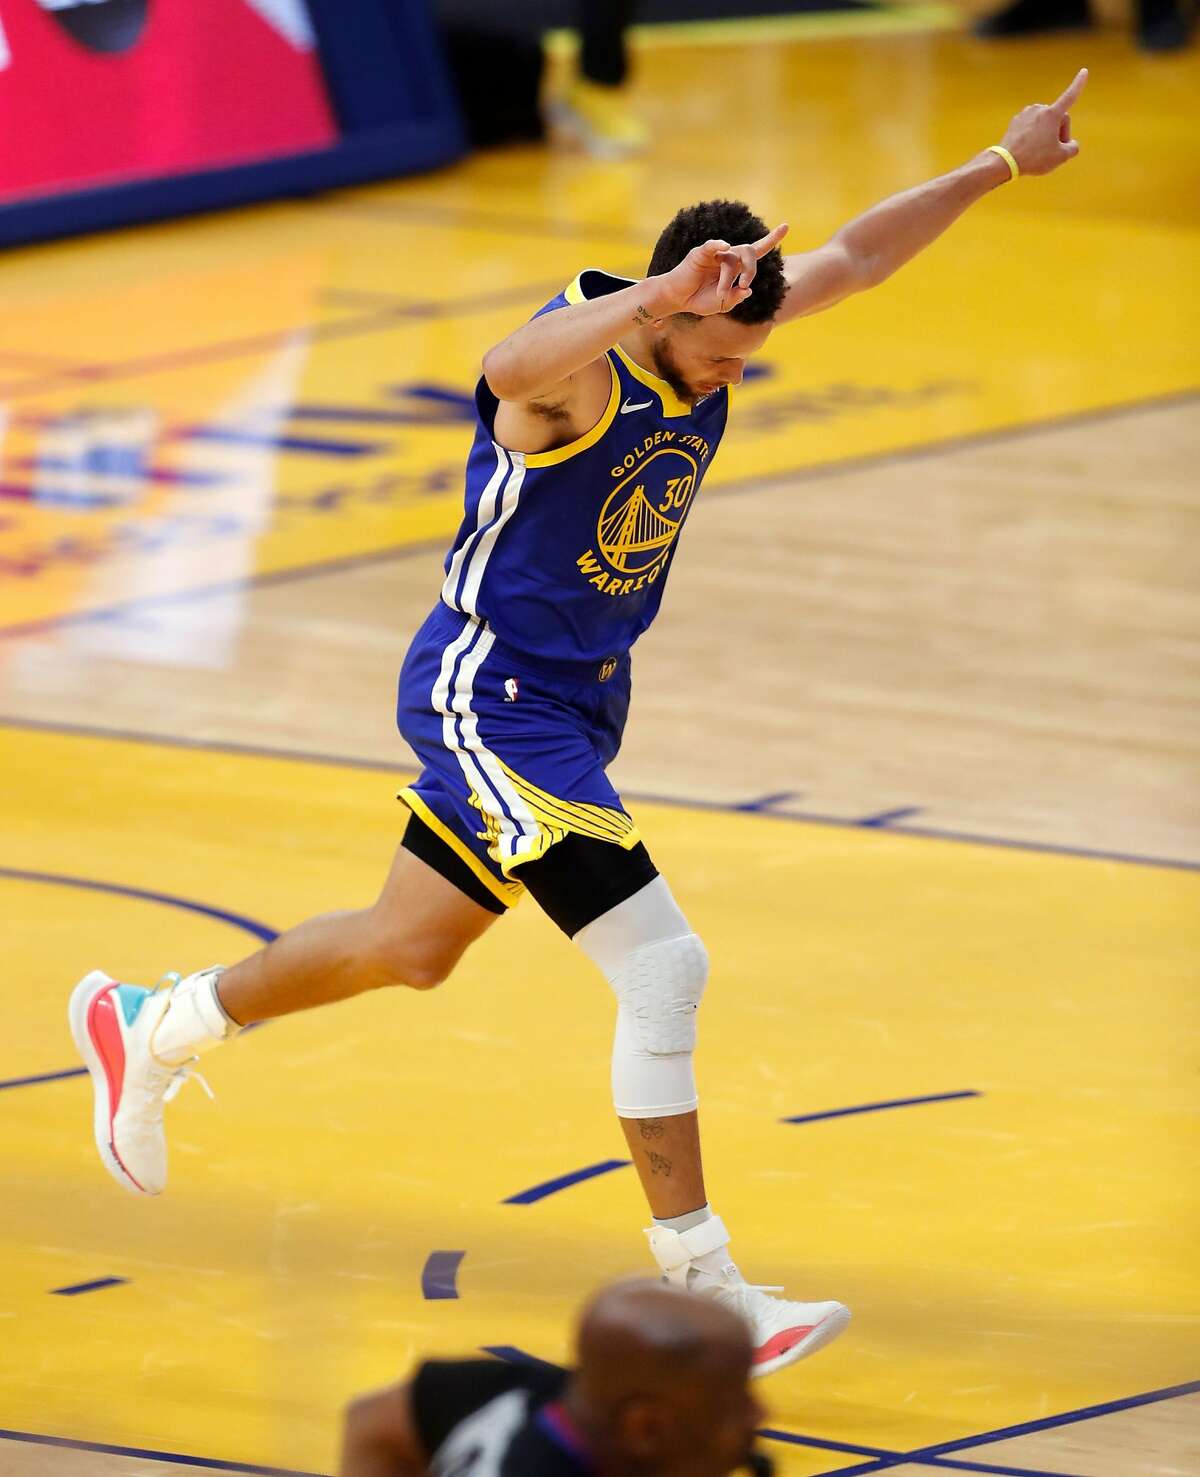 Stephen Curry reacts to a first-quarter basket that vaulted him past Wilt Chamberlain on the Warriors’ franchise scoring list.